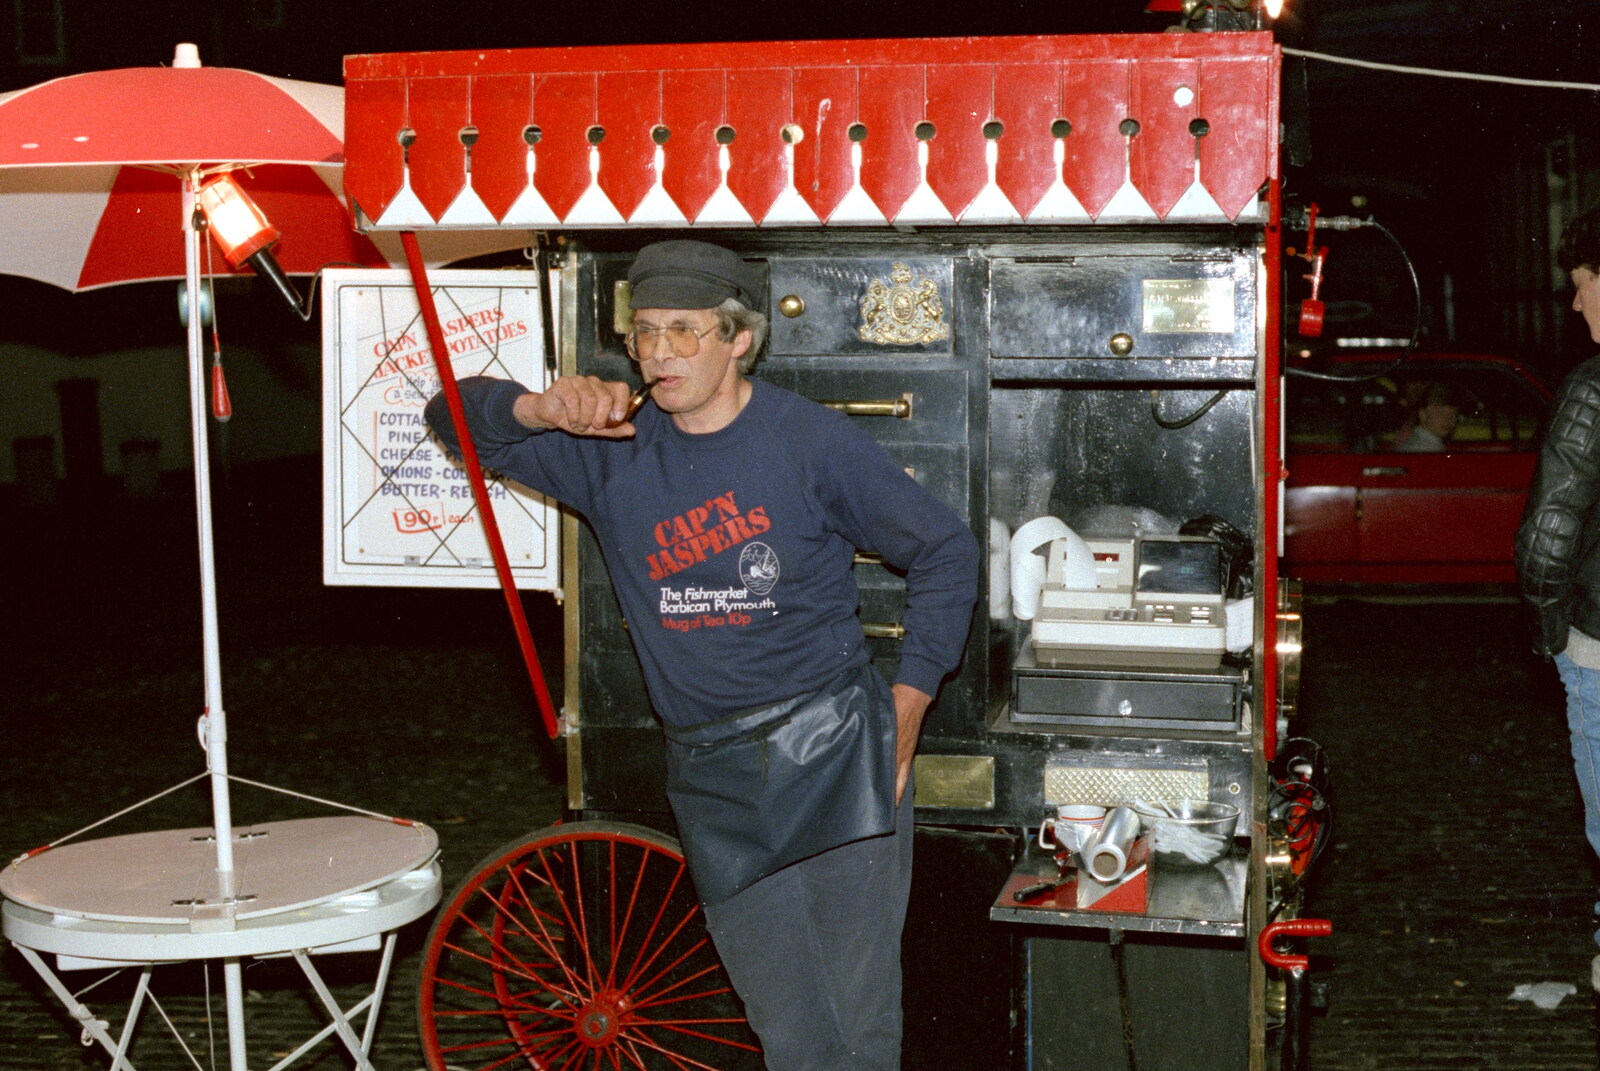 Capn's Jasper's potato stall, by the Fish Market from Uni: A Plymouth Hoe Panorama, Plymouth, Devon - 7th May 1986